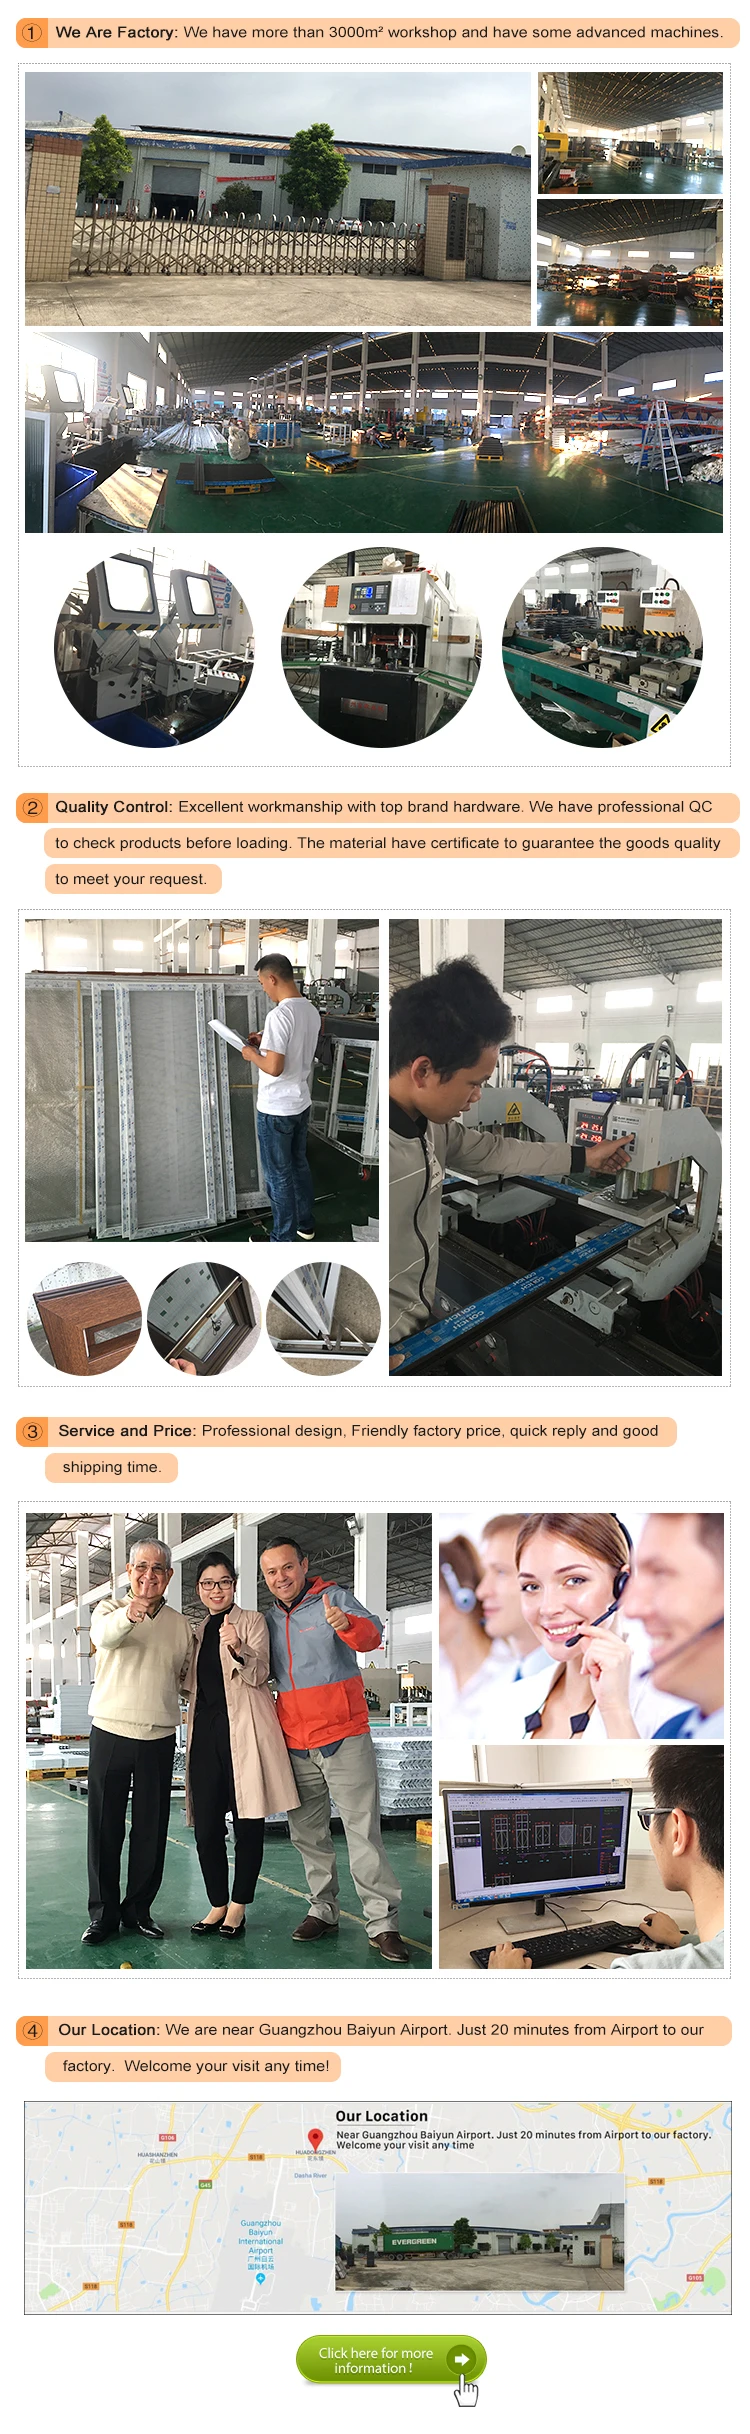 Guangdong Guangzhou Aluminum Glass Door And Window Frame Factory For Office